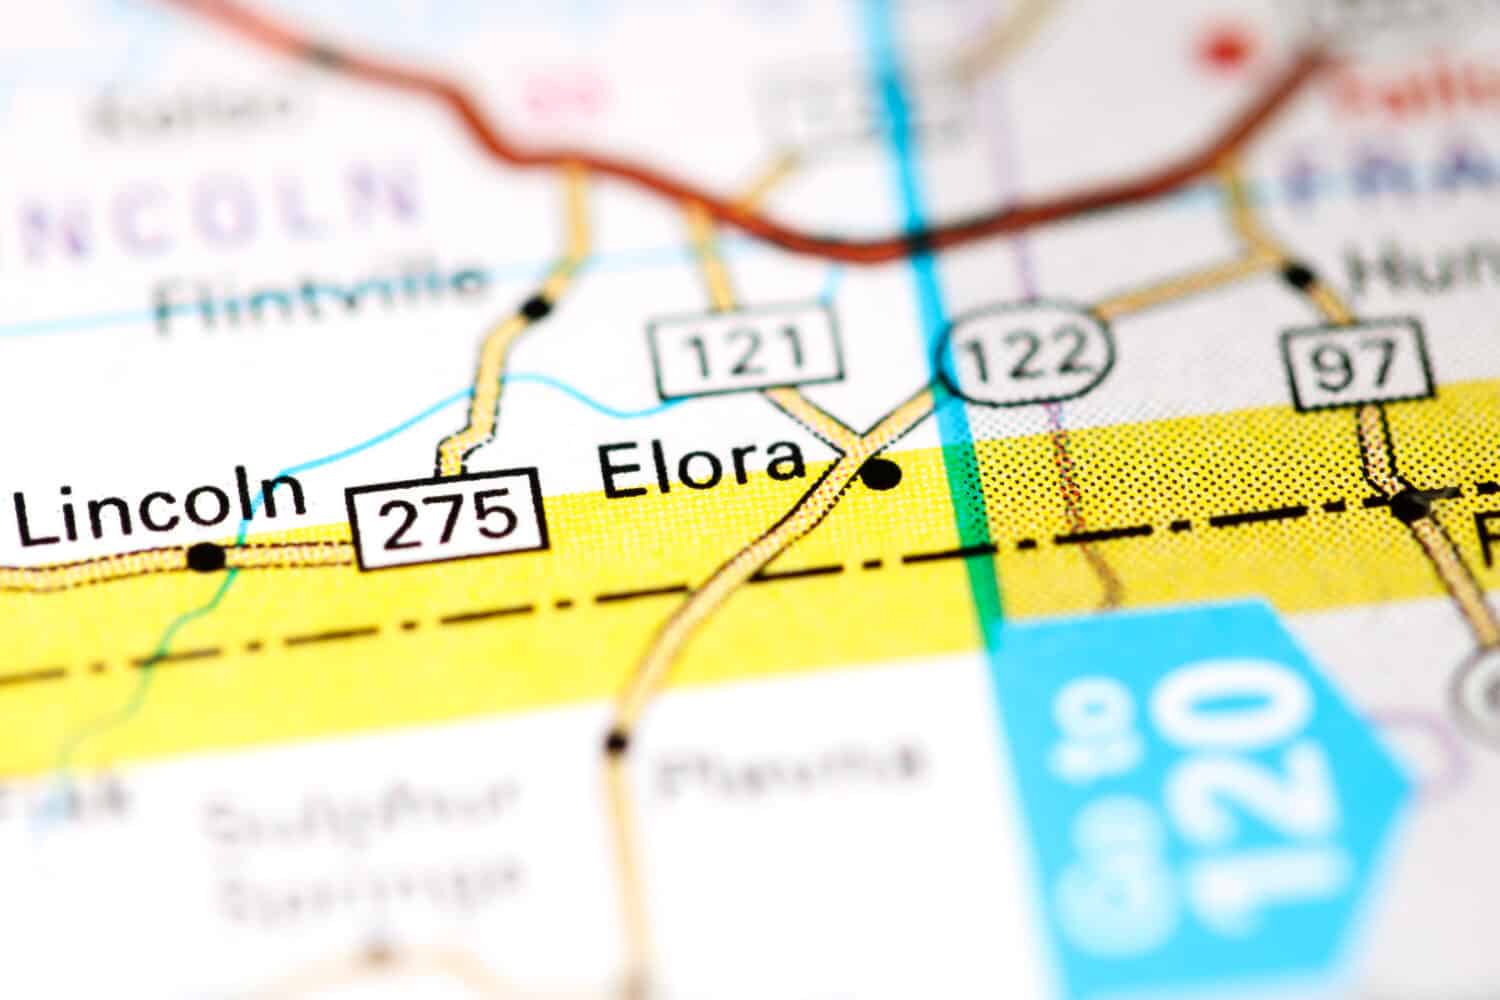 Elora. Tennessee. USA on a map